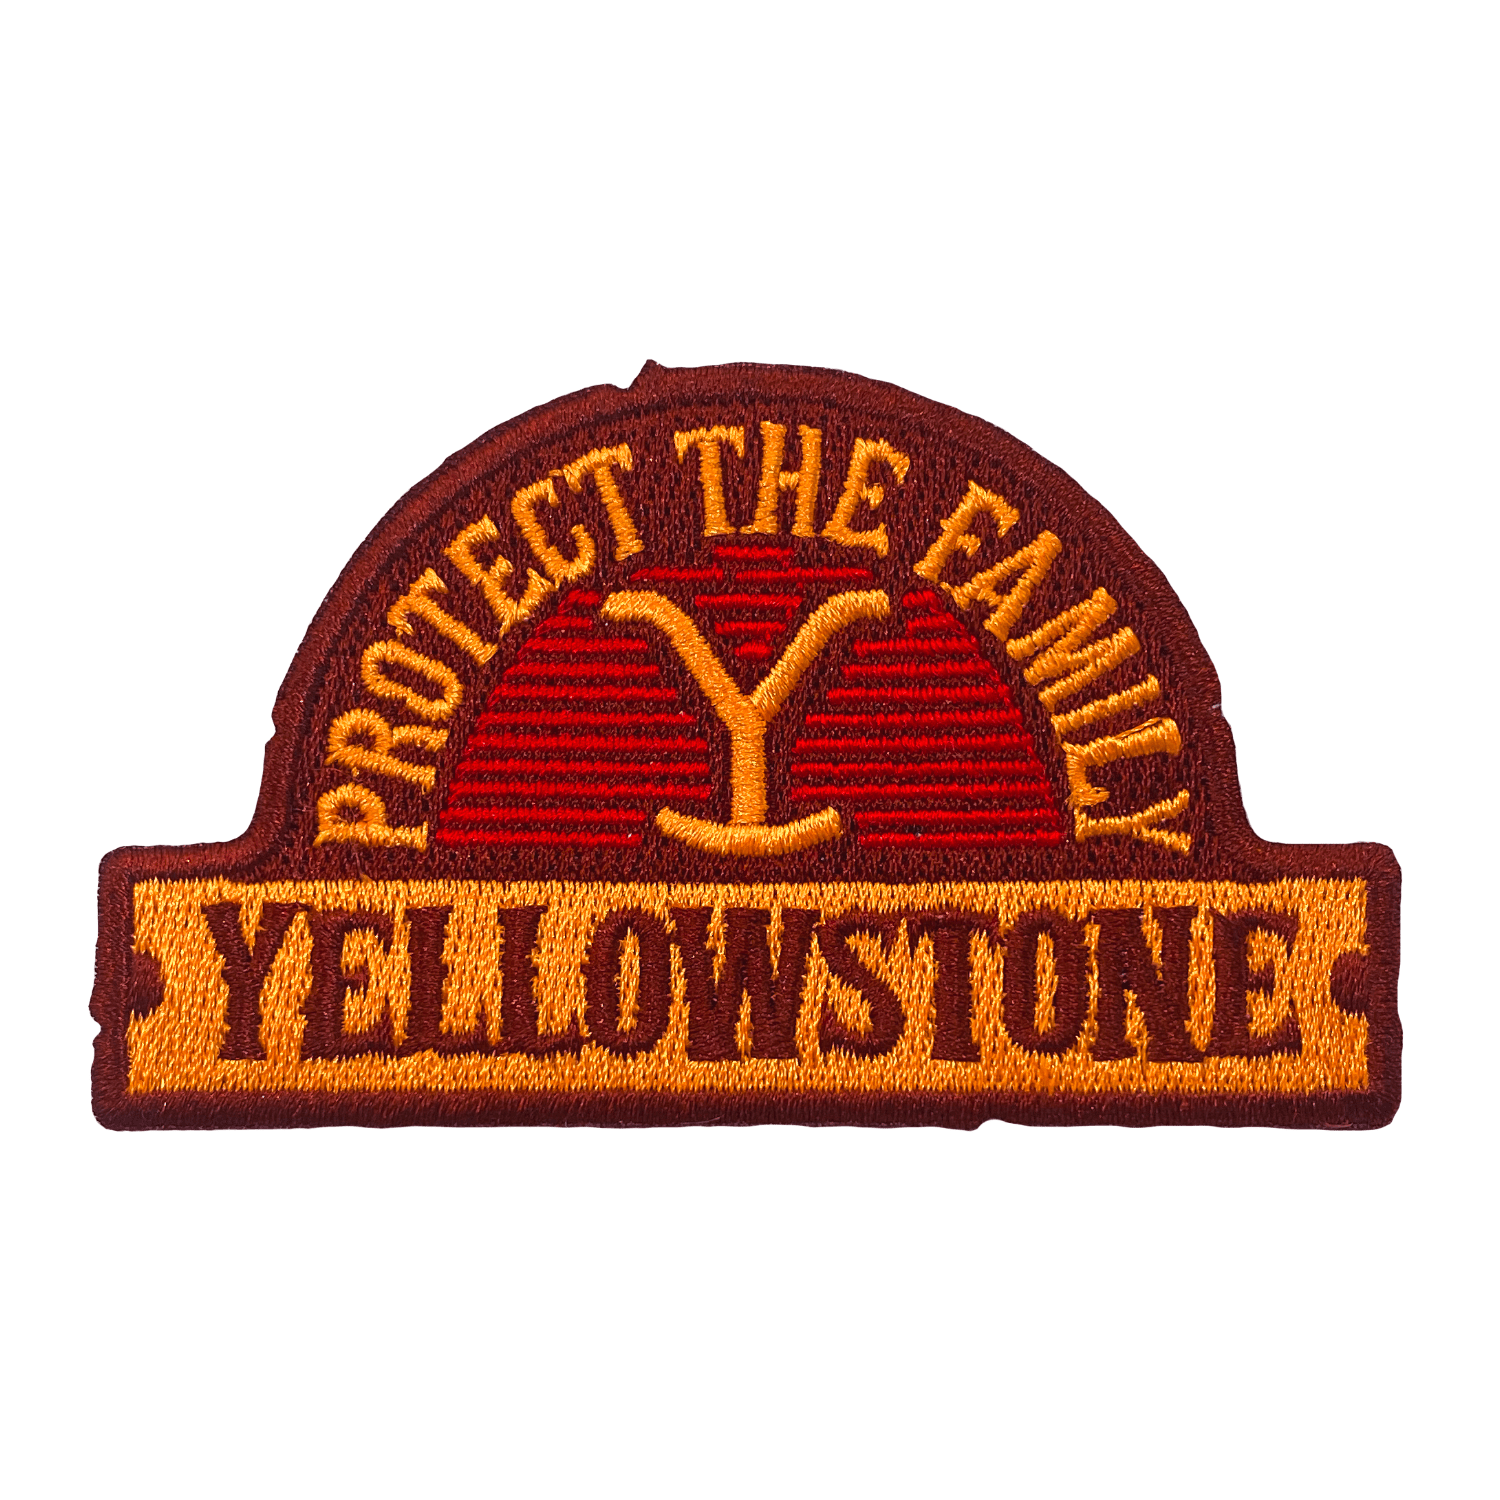 Yellowstone Dutton Ranch Iron On Patches - Pack of 3 - Paramount Shop